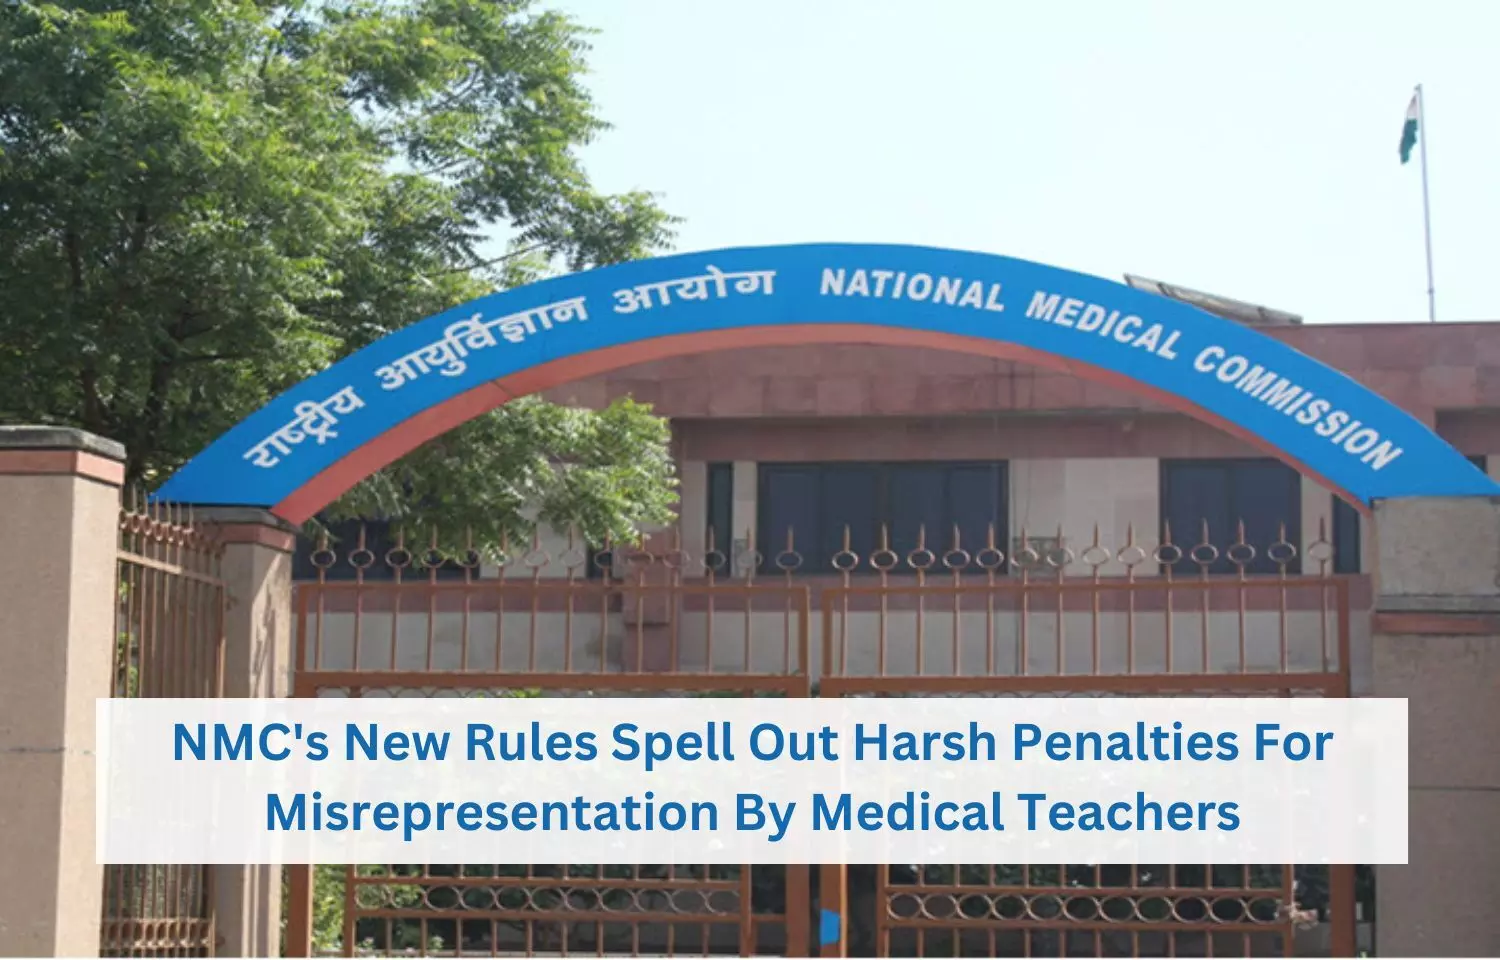 New rules of NMC spell out harsh penalties for misrepresentation by medical teachers